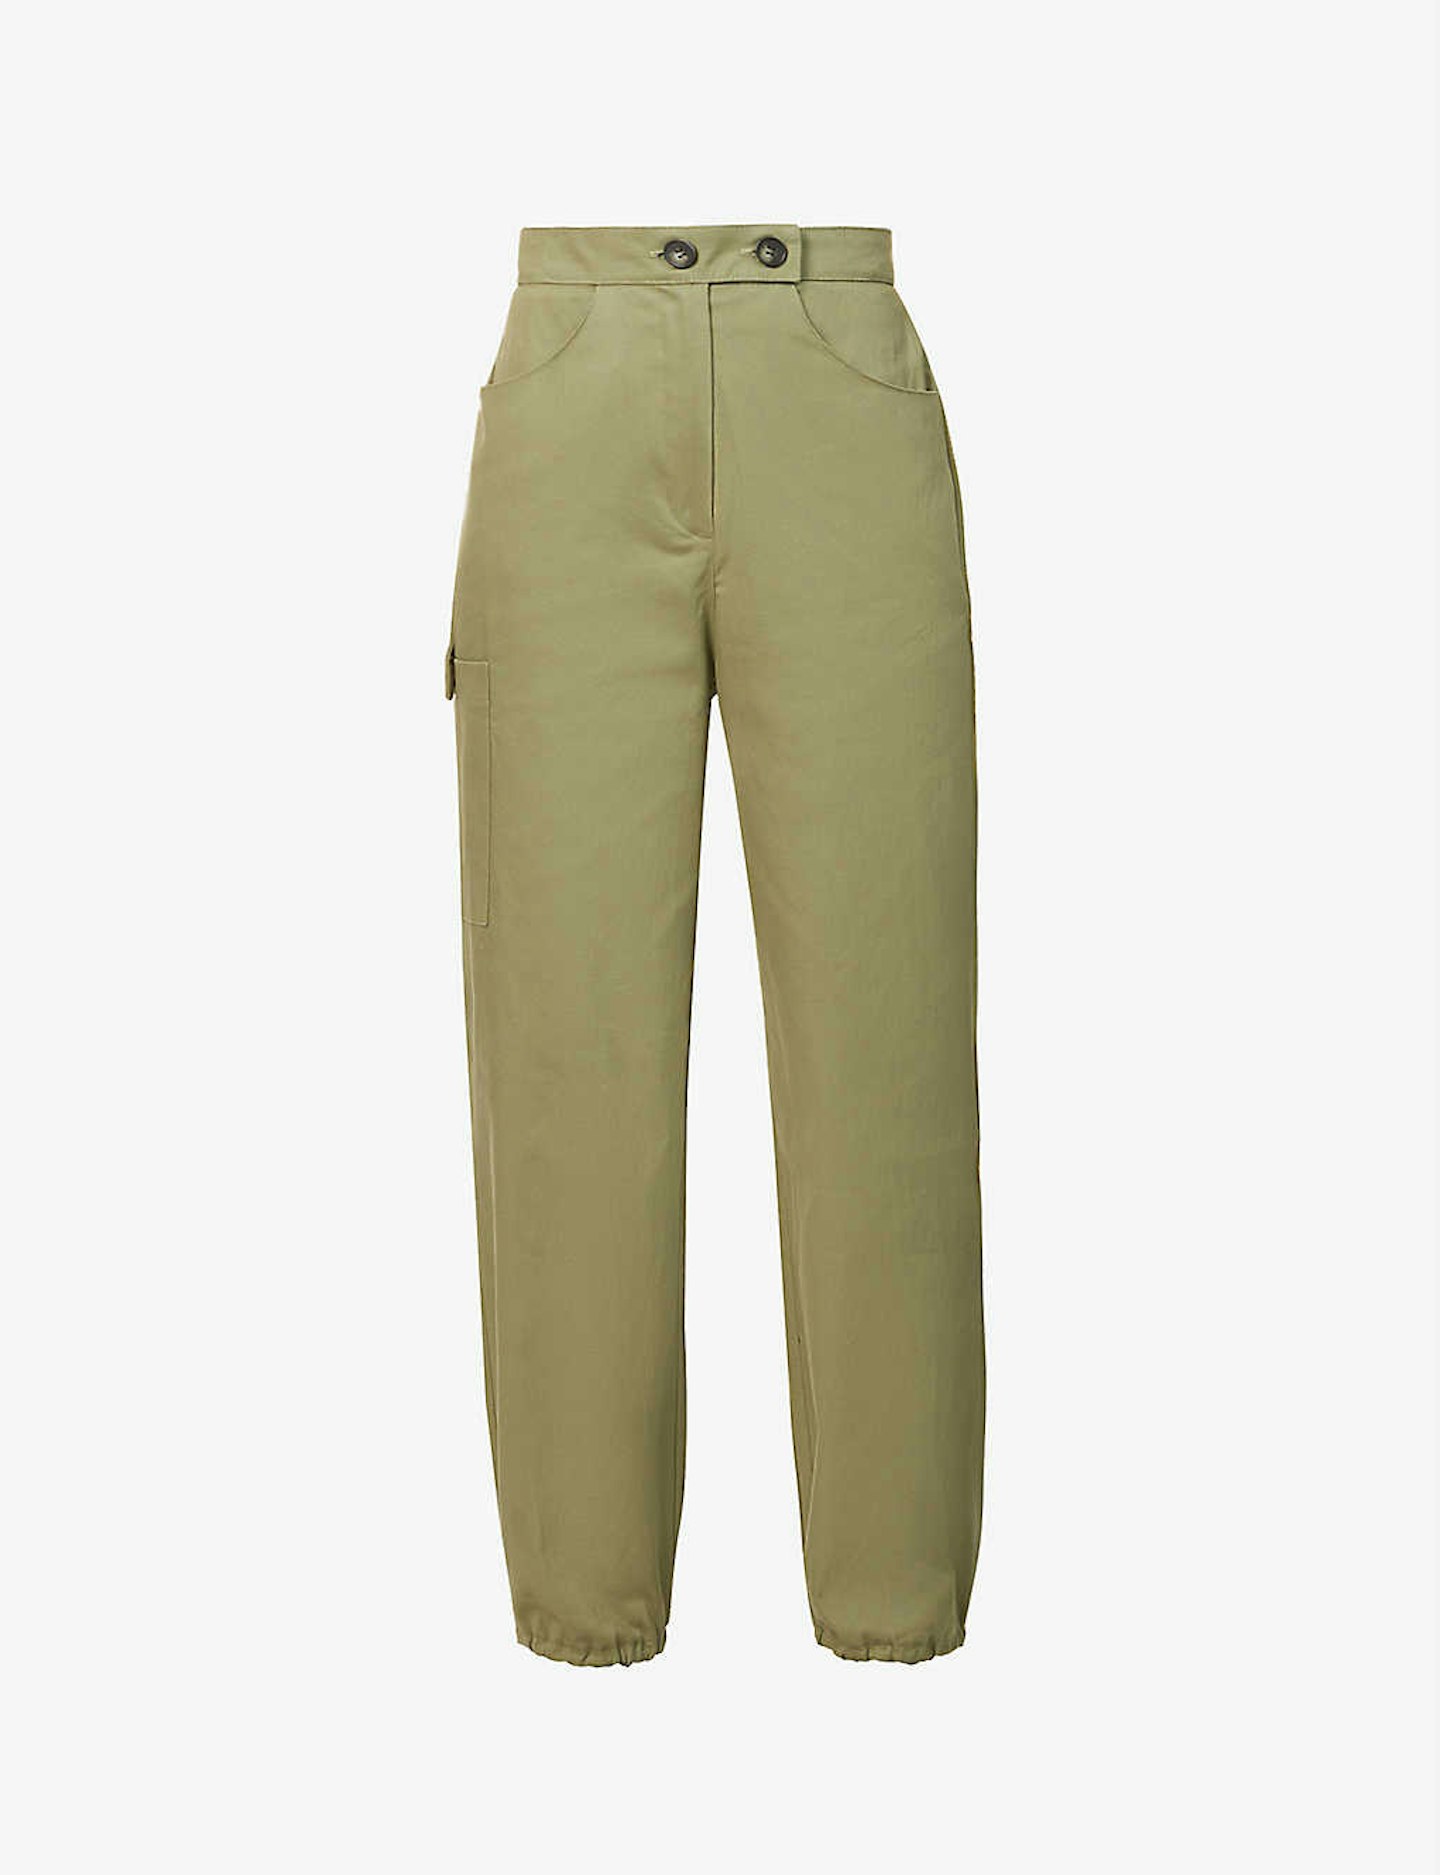 The Range, Structured Cargo High-Rise Stretch-Cotton Trousers, £280